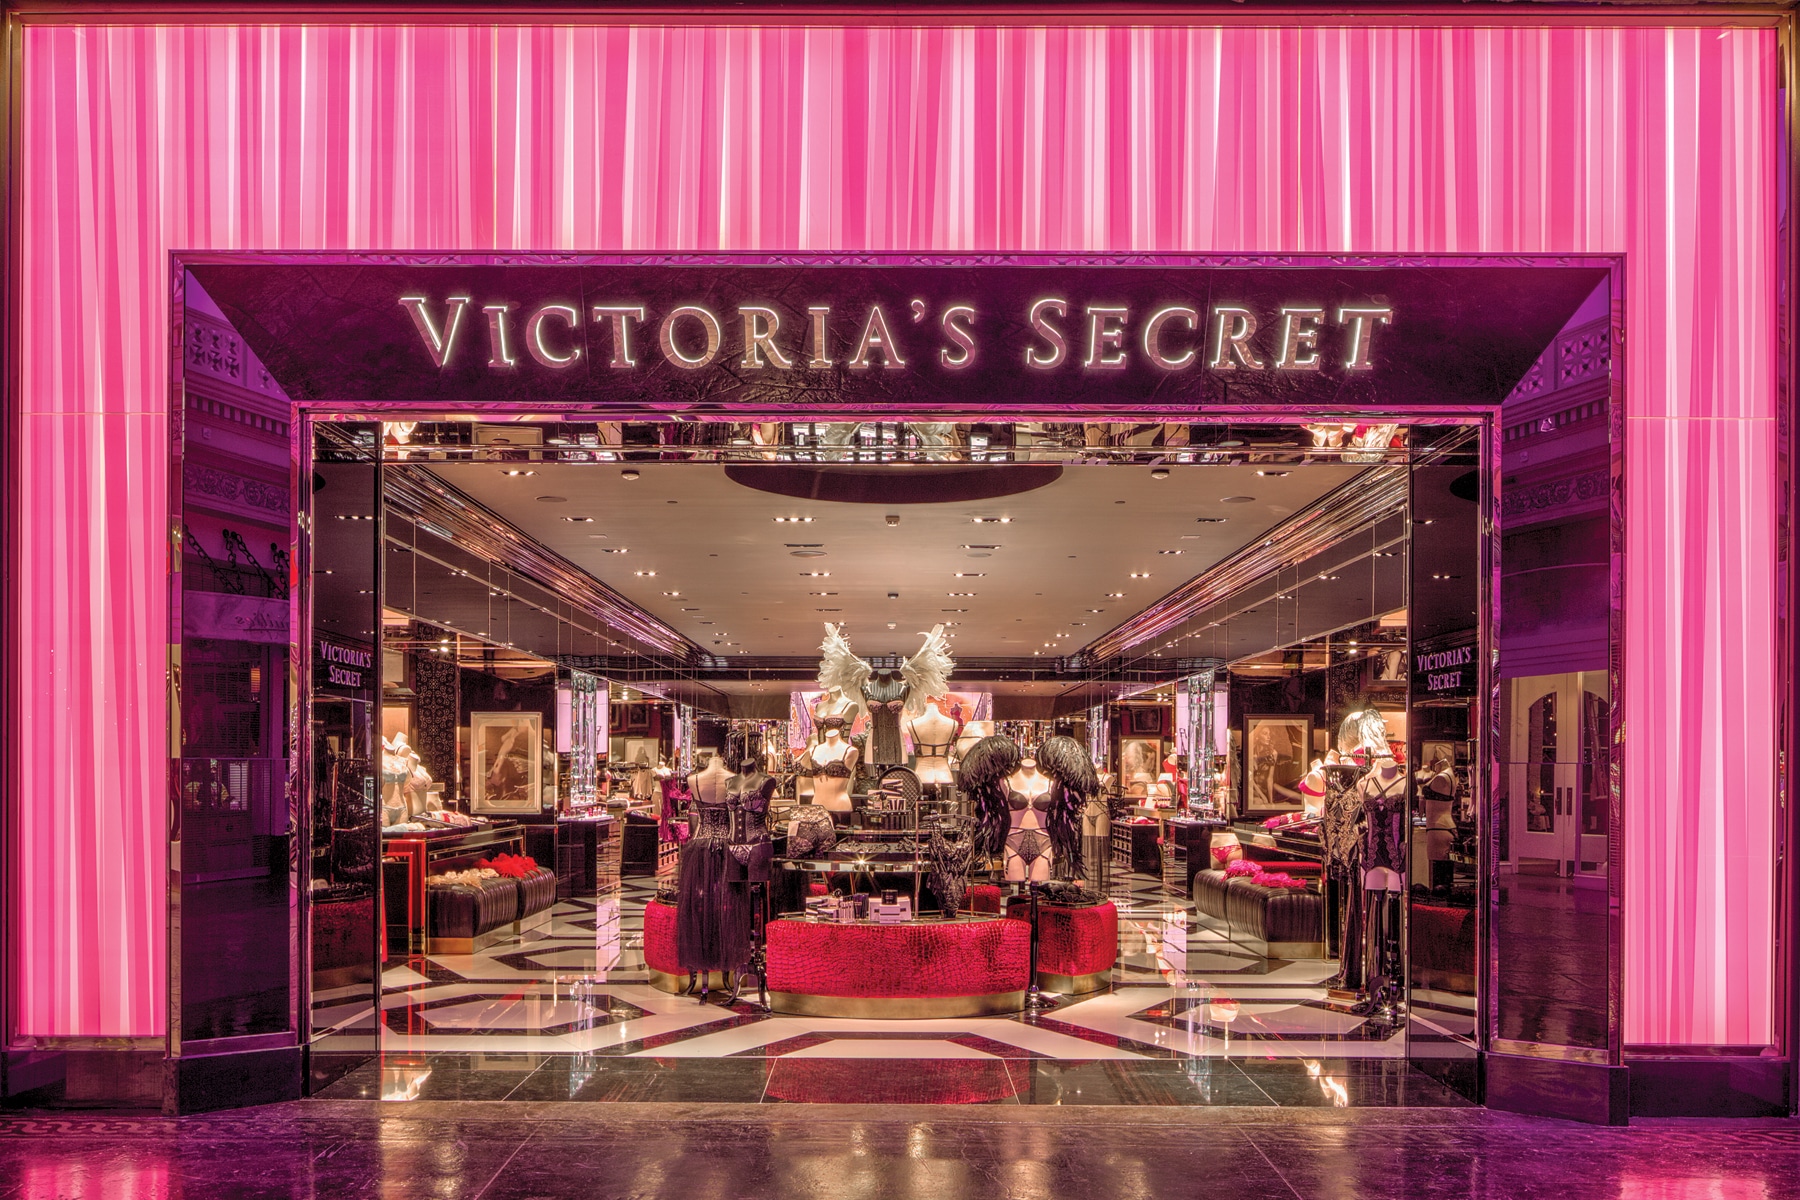 Victoria's Secret Adds AI to Online Shopping – Visual Merchandising and  Store Design